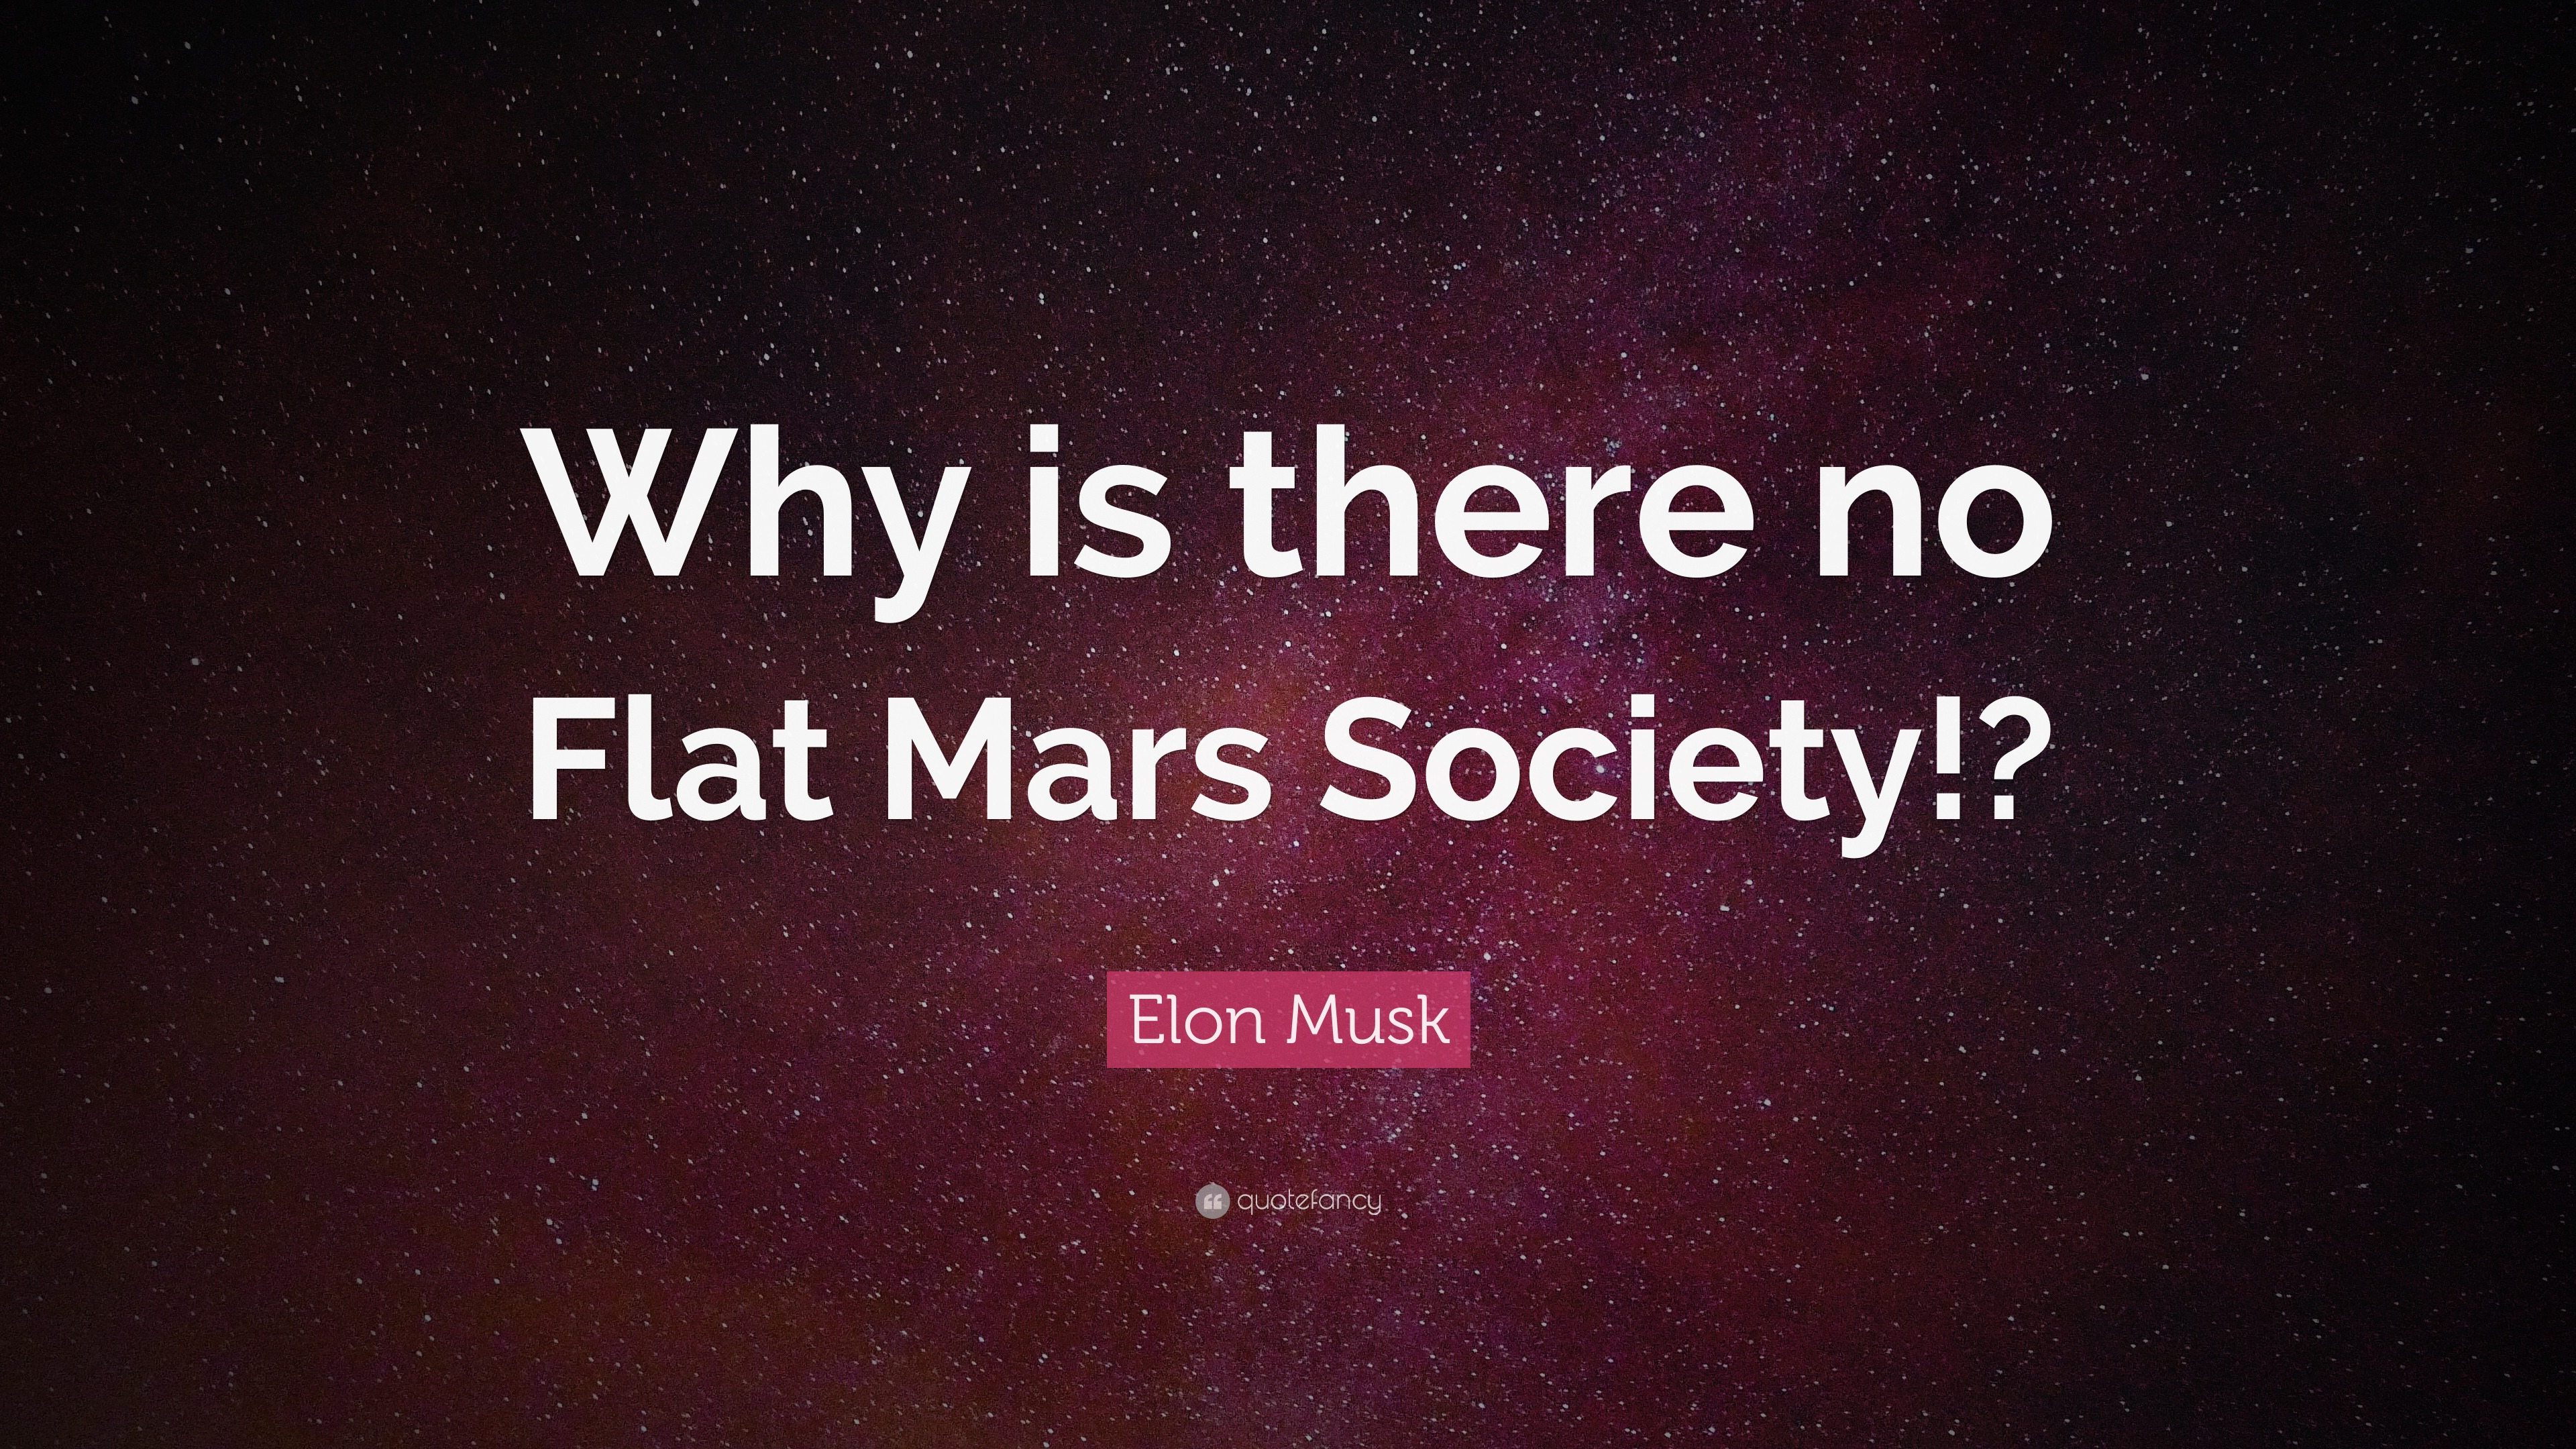 Elon Musk Quote: “Why is there no Flat Mars Society!?” (5 wallpapers